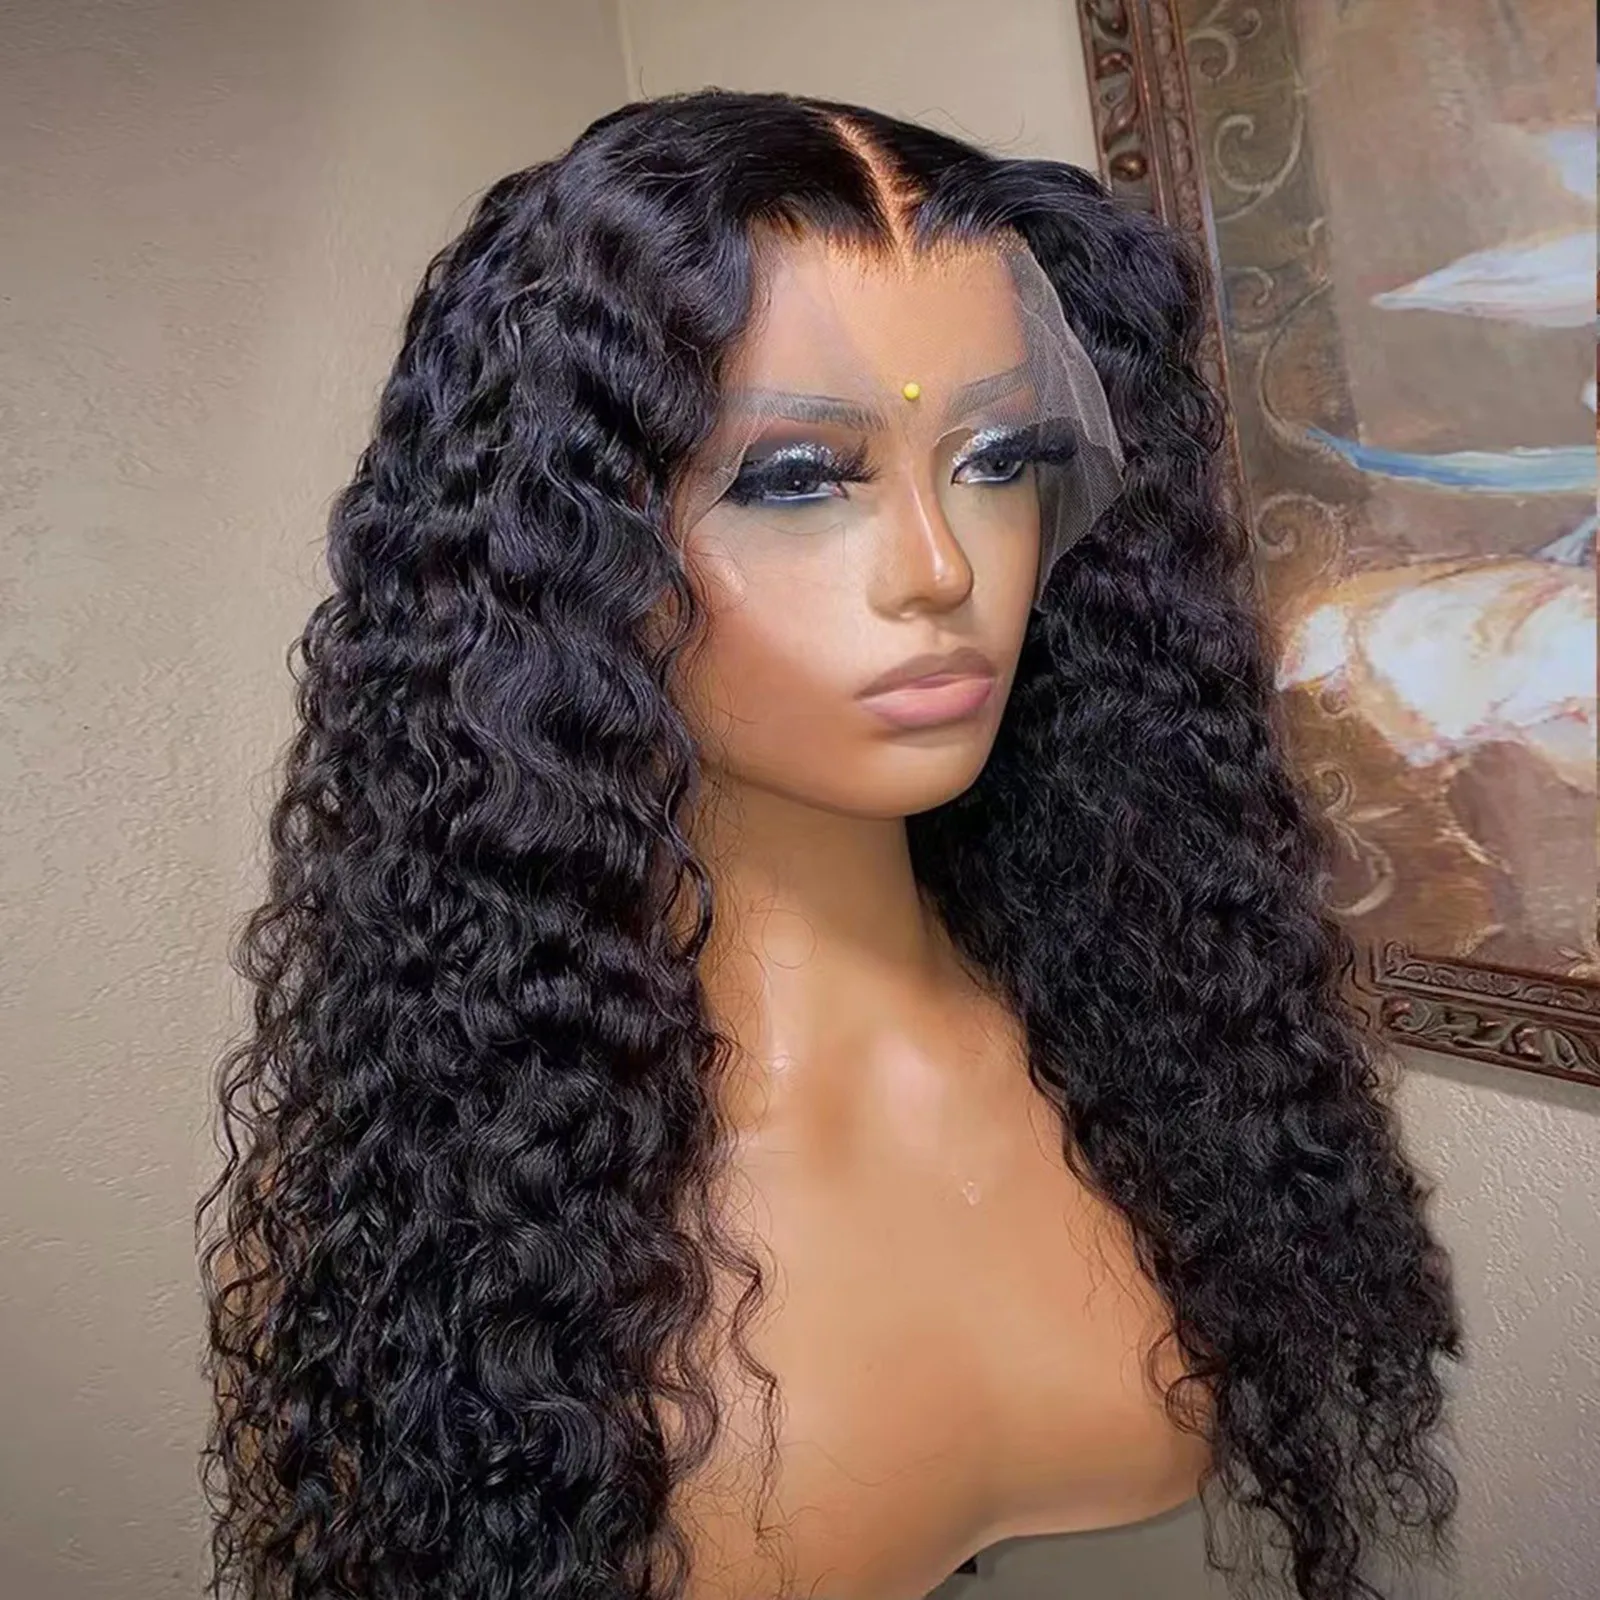 Deep Wave Frontal Wig Human Hair 13x4 Curly Lace Front Wig Full Hd Transparent Lace Water Wave Wigs For Black Women Wet